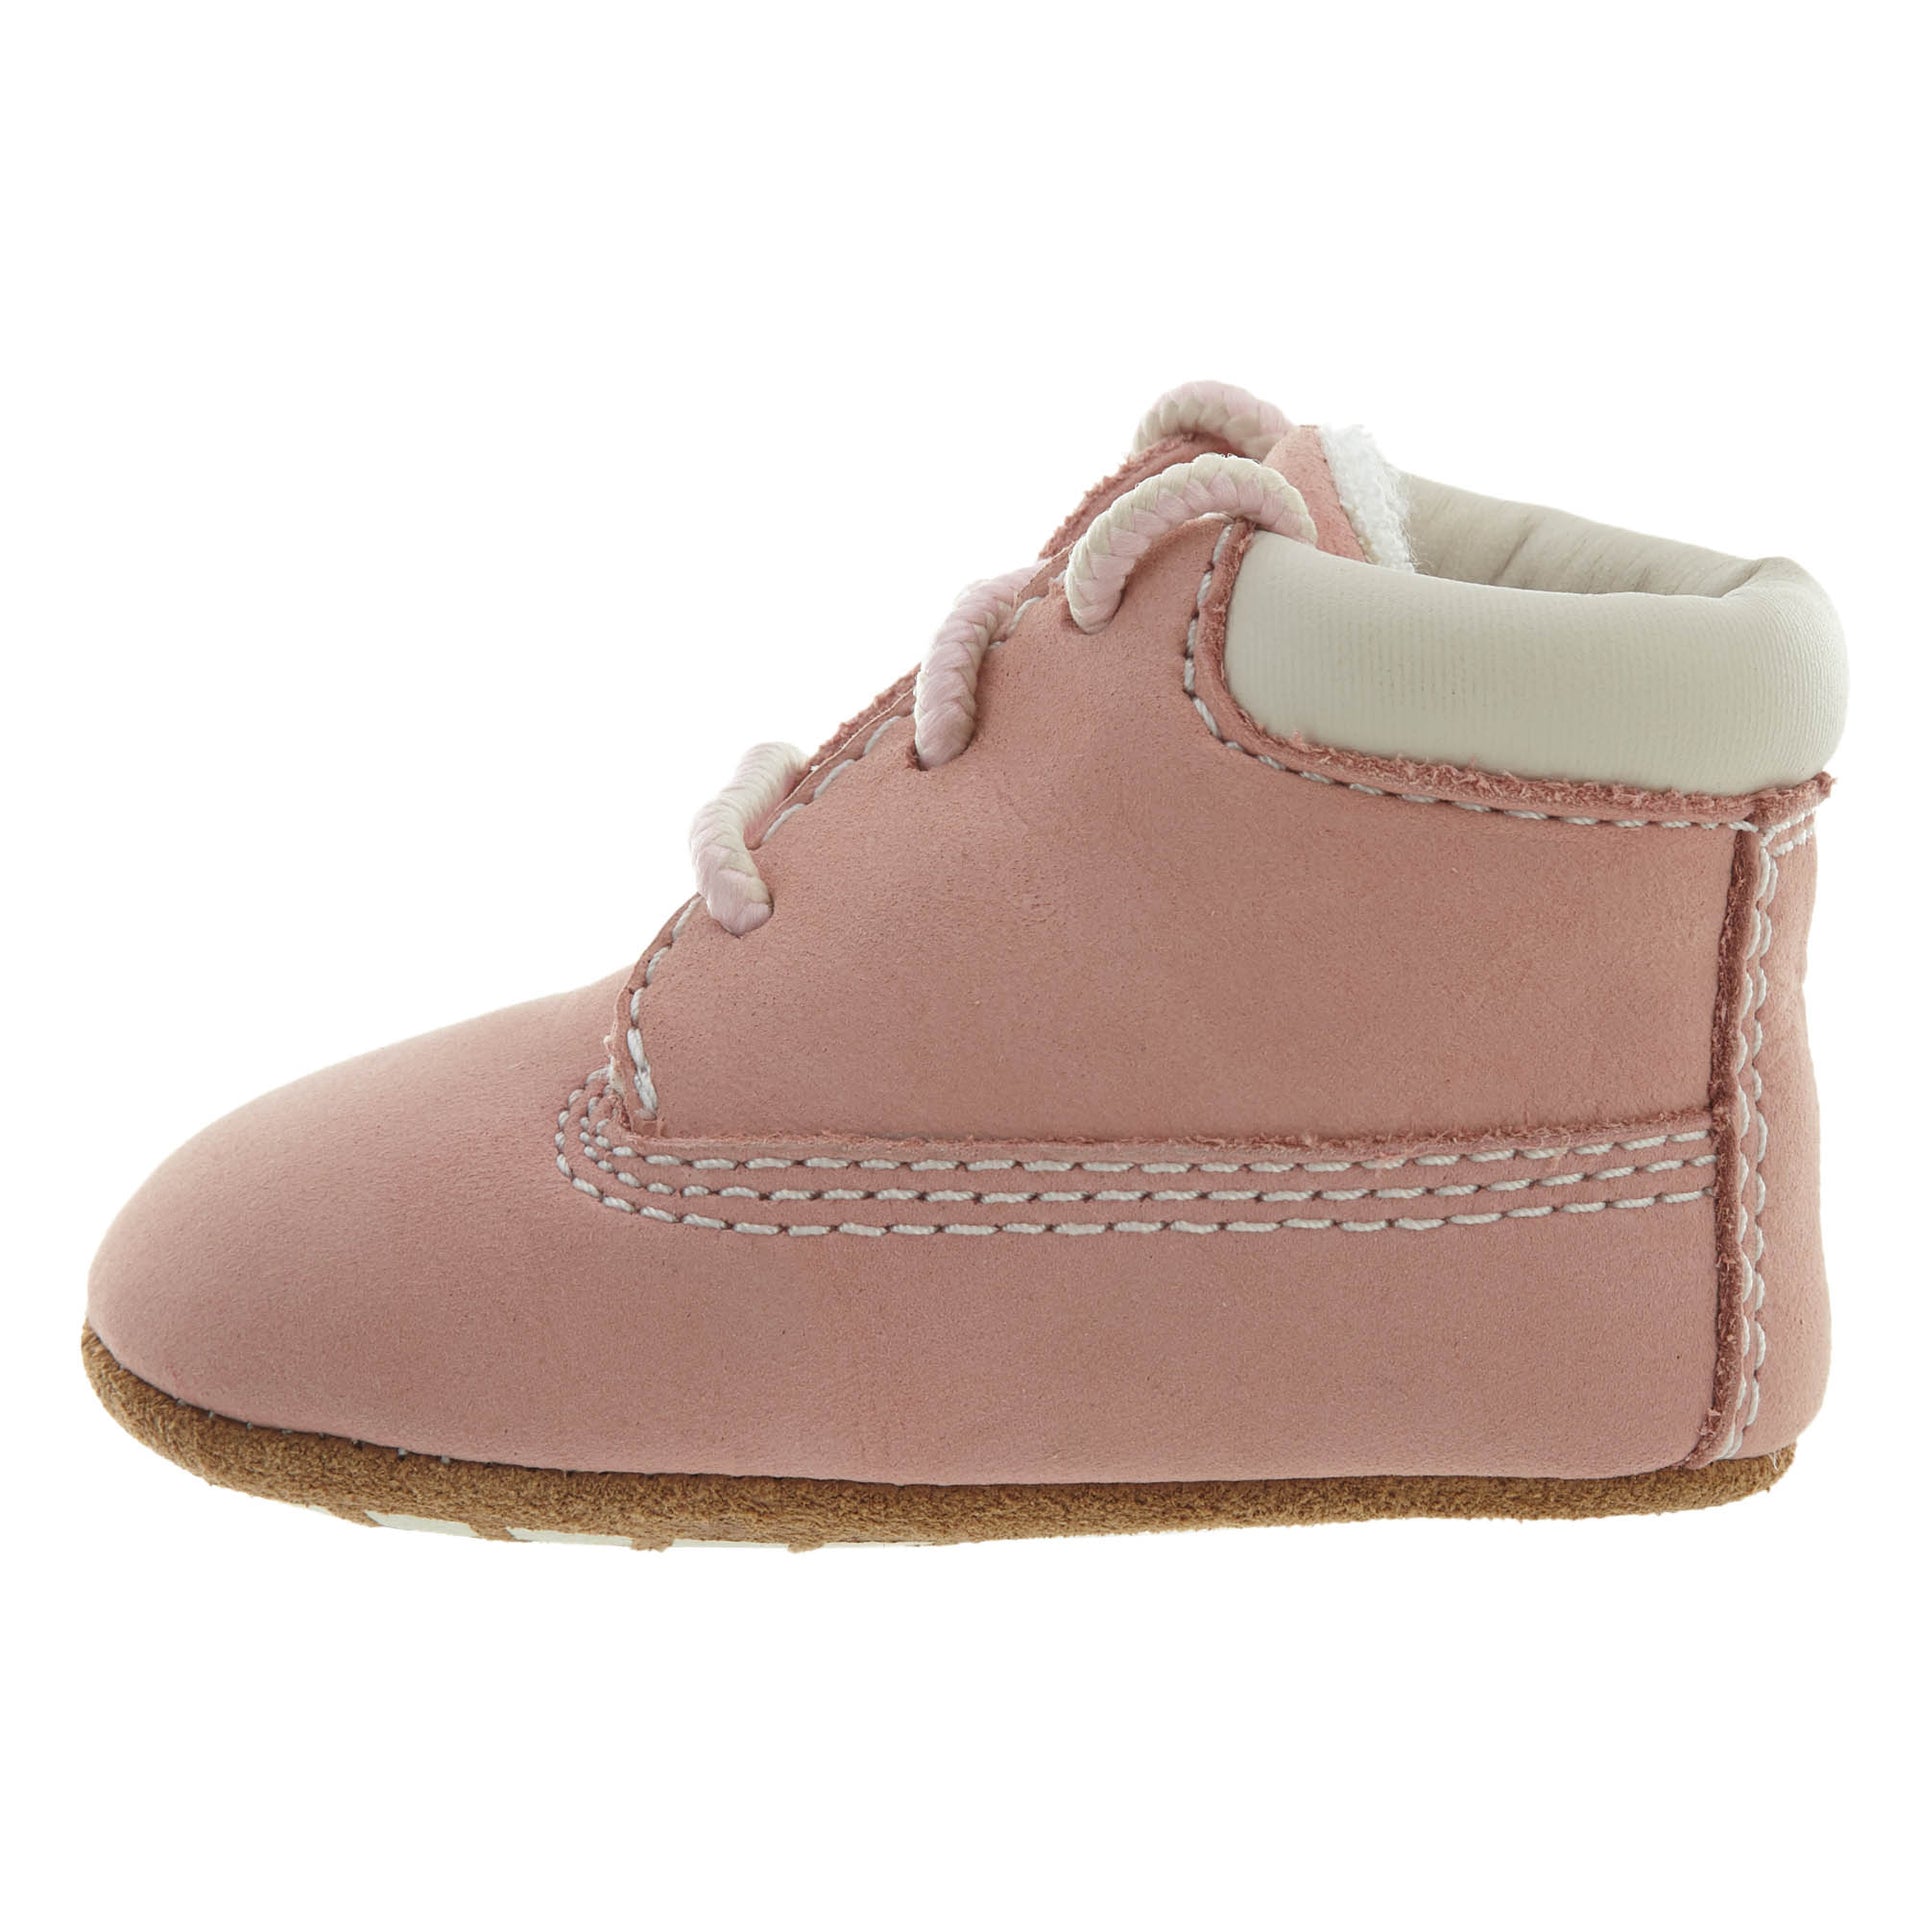 Timberland Bootie W/Hat Crib Style # 10145